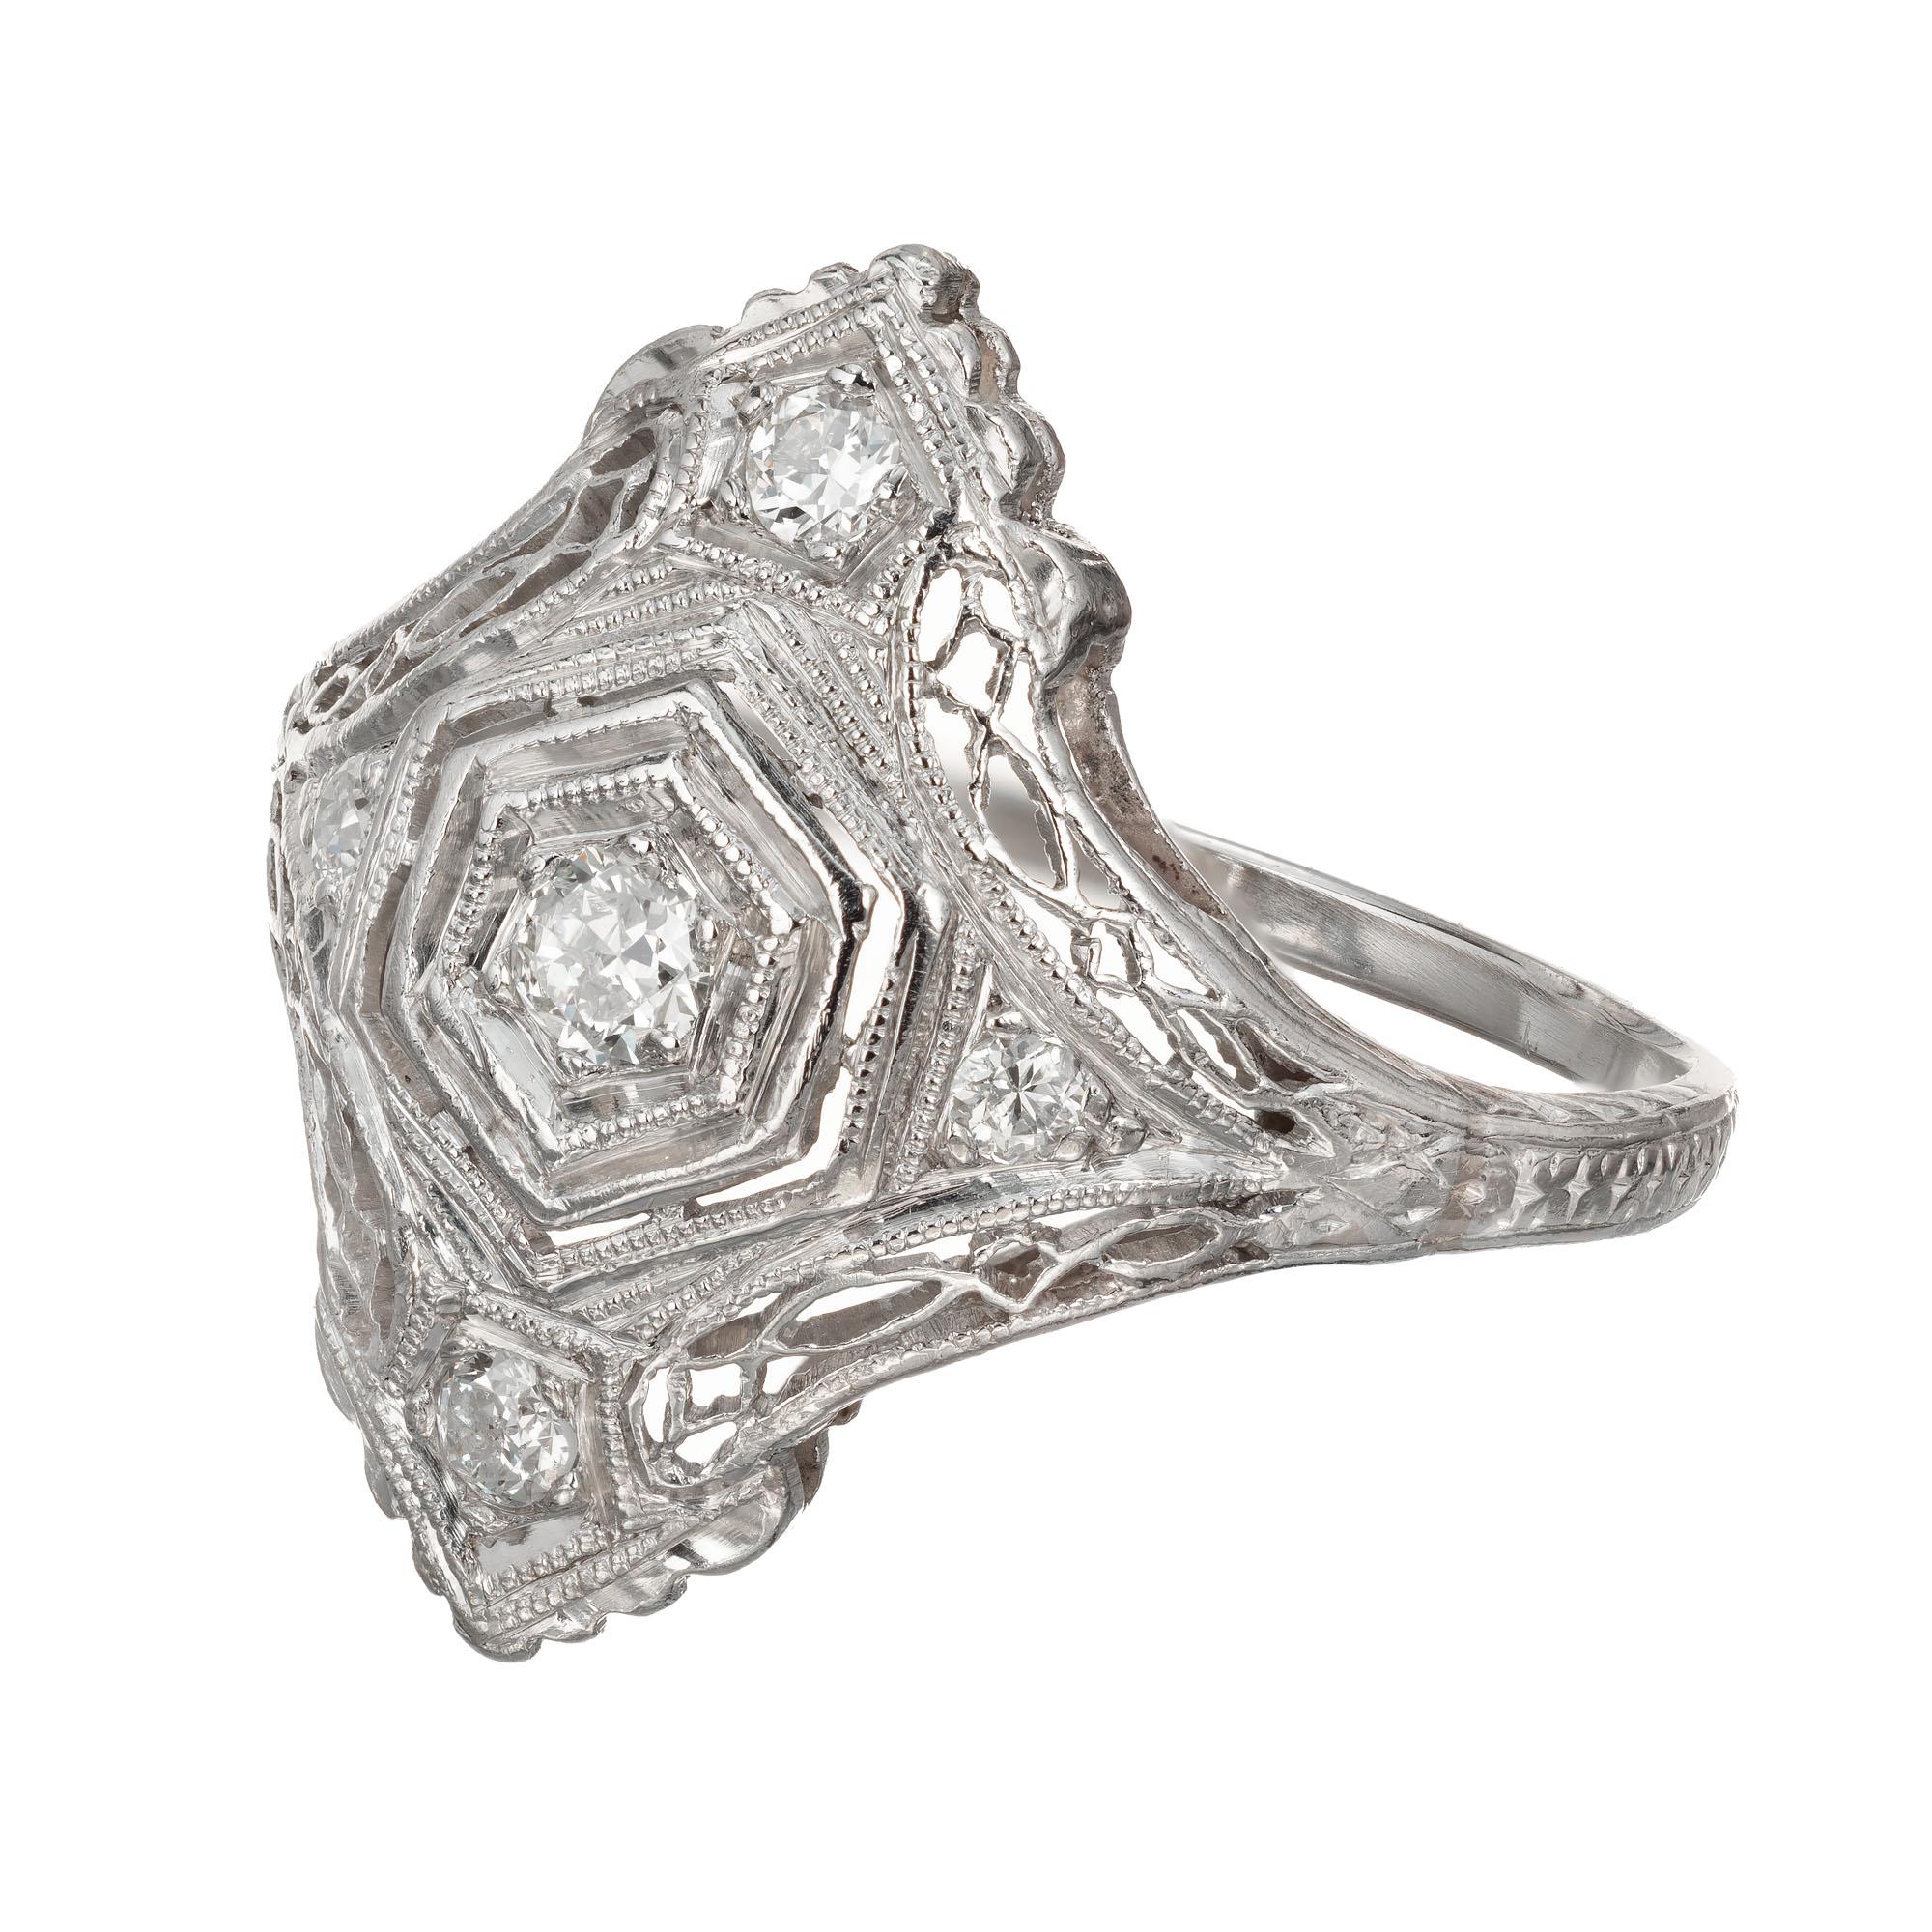 Art Deco 1920's Diamond filigree Platinum hand pierced and hand engraved ring. European full cut diamonds. Handmade.

5 European cut diamonds, approx. total weight .12cts, H, VS2 - SI1
Size 6+ and sizable
Platinum
Platinum 950
3.0 grams
Stamped: